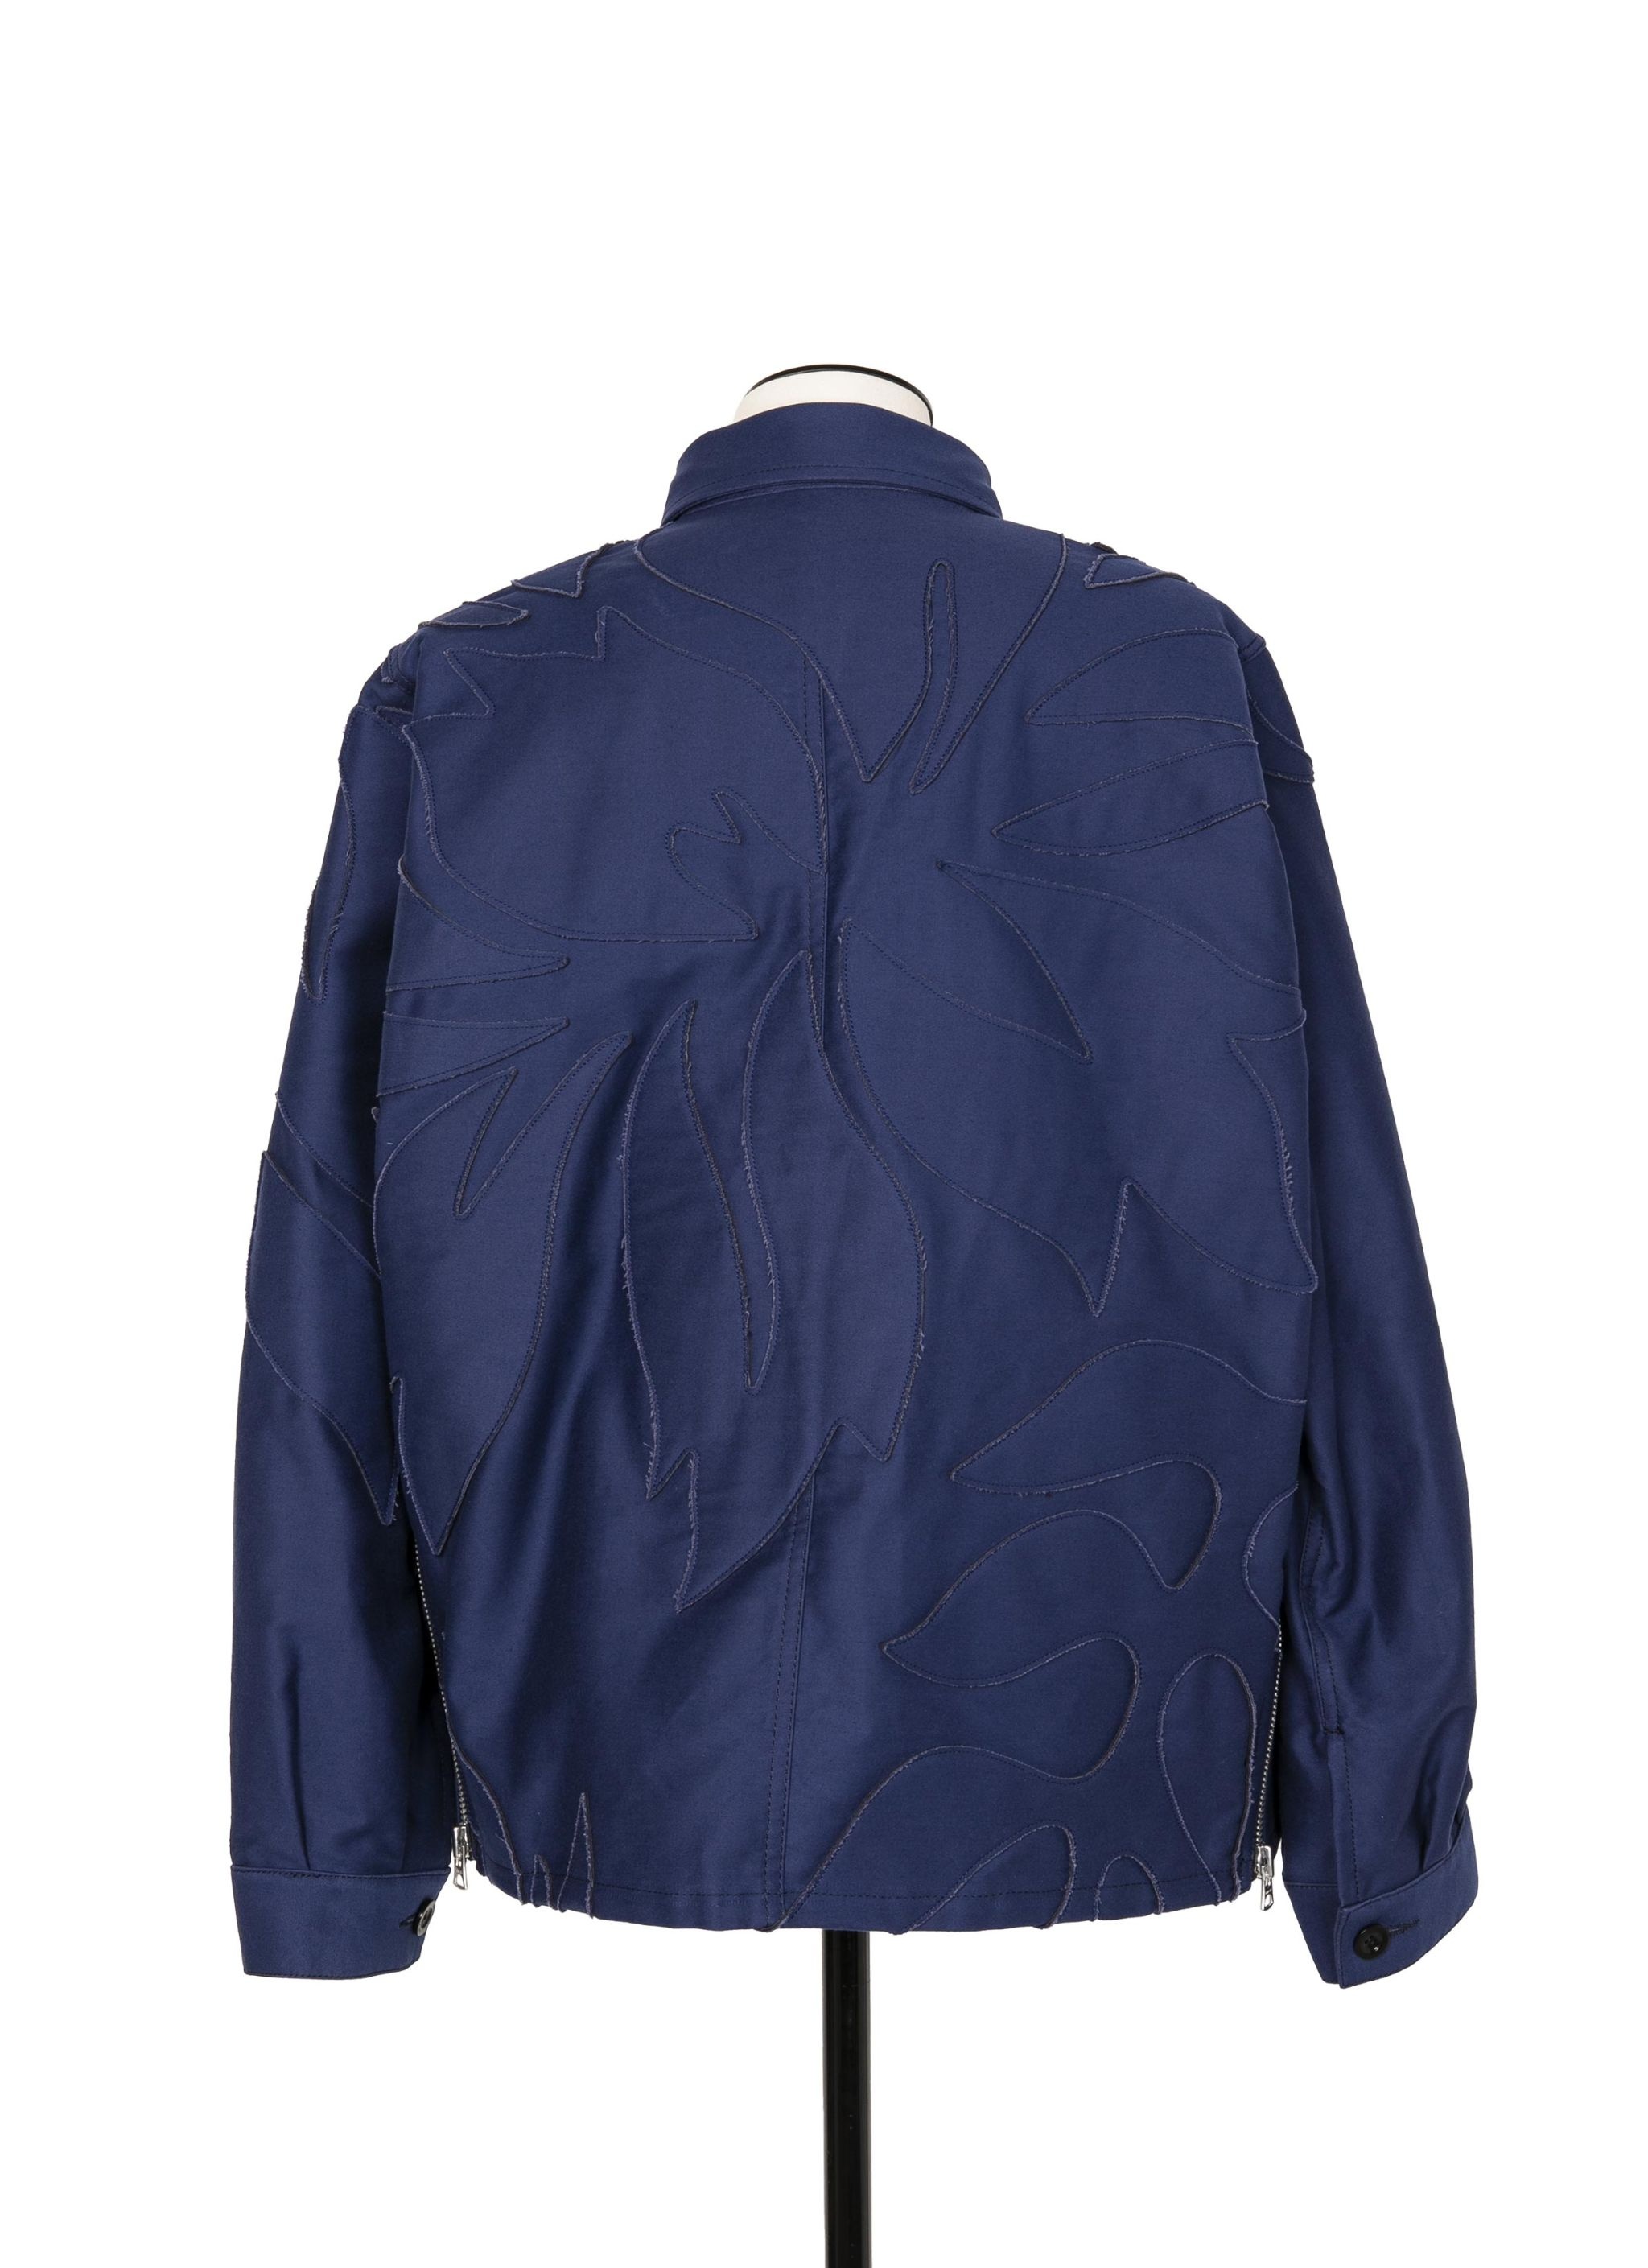 Moleskin Embroidered Patch Jacket - 5